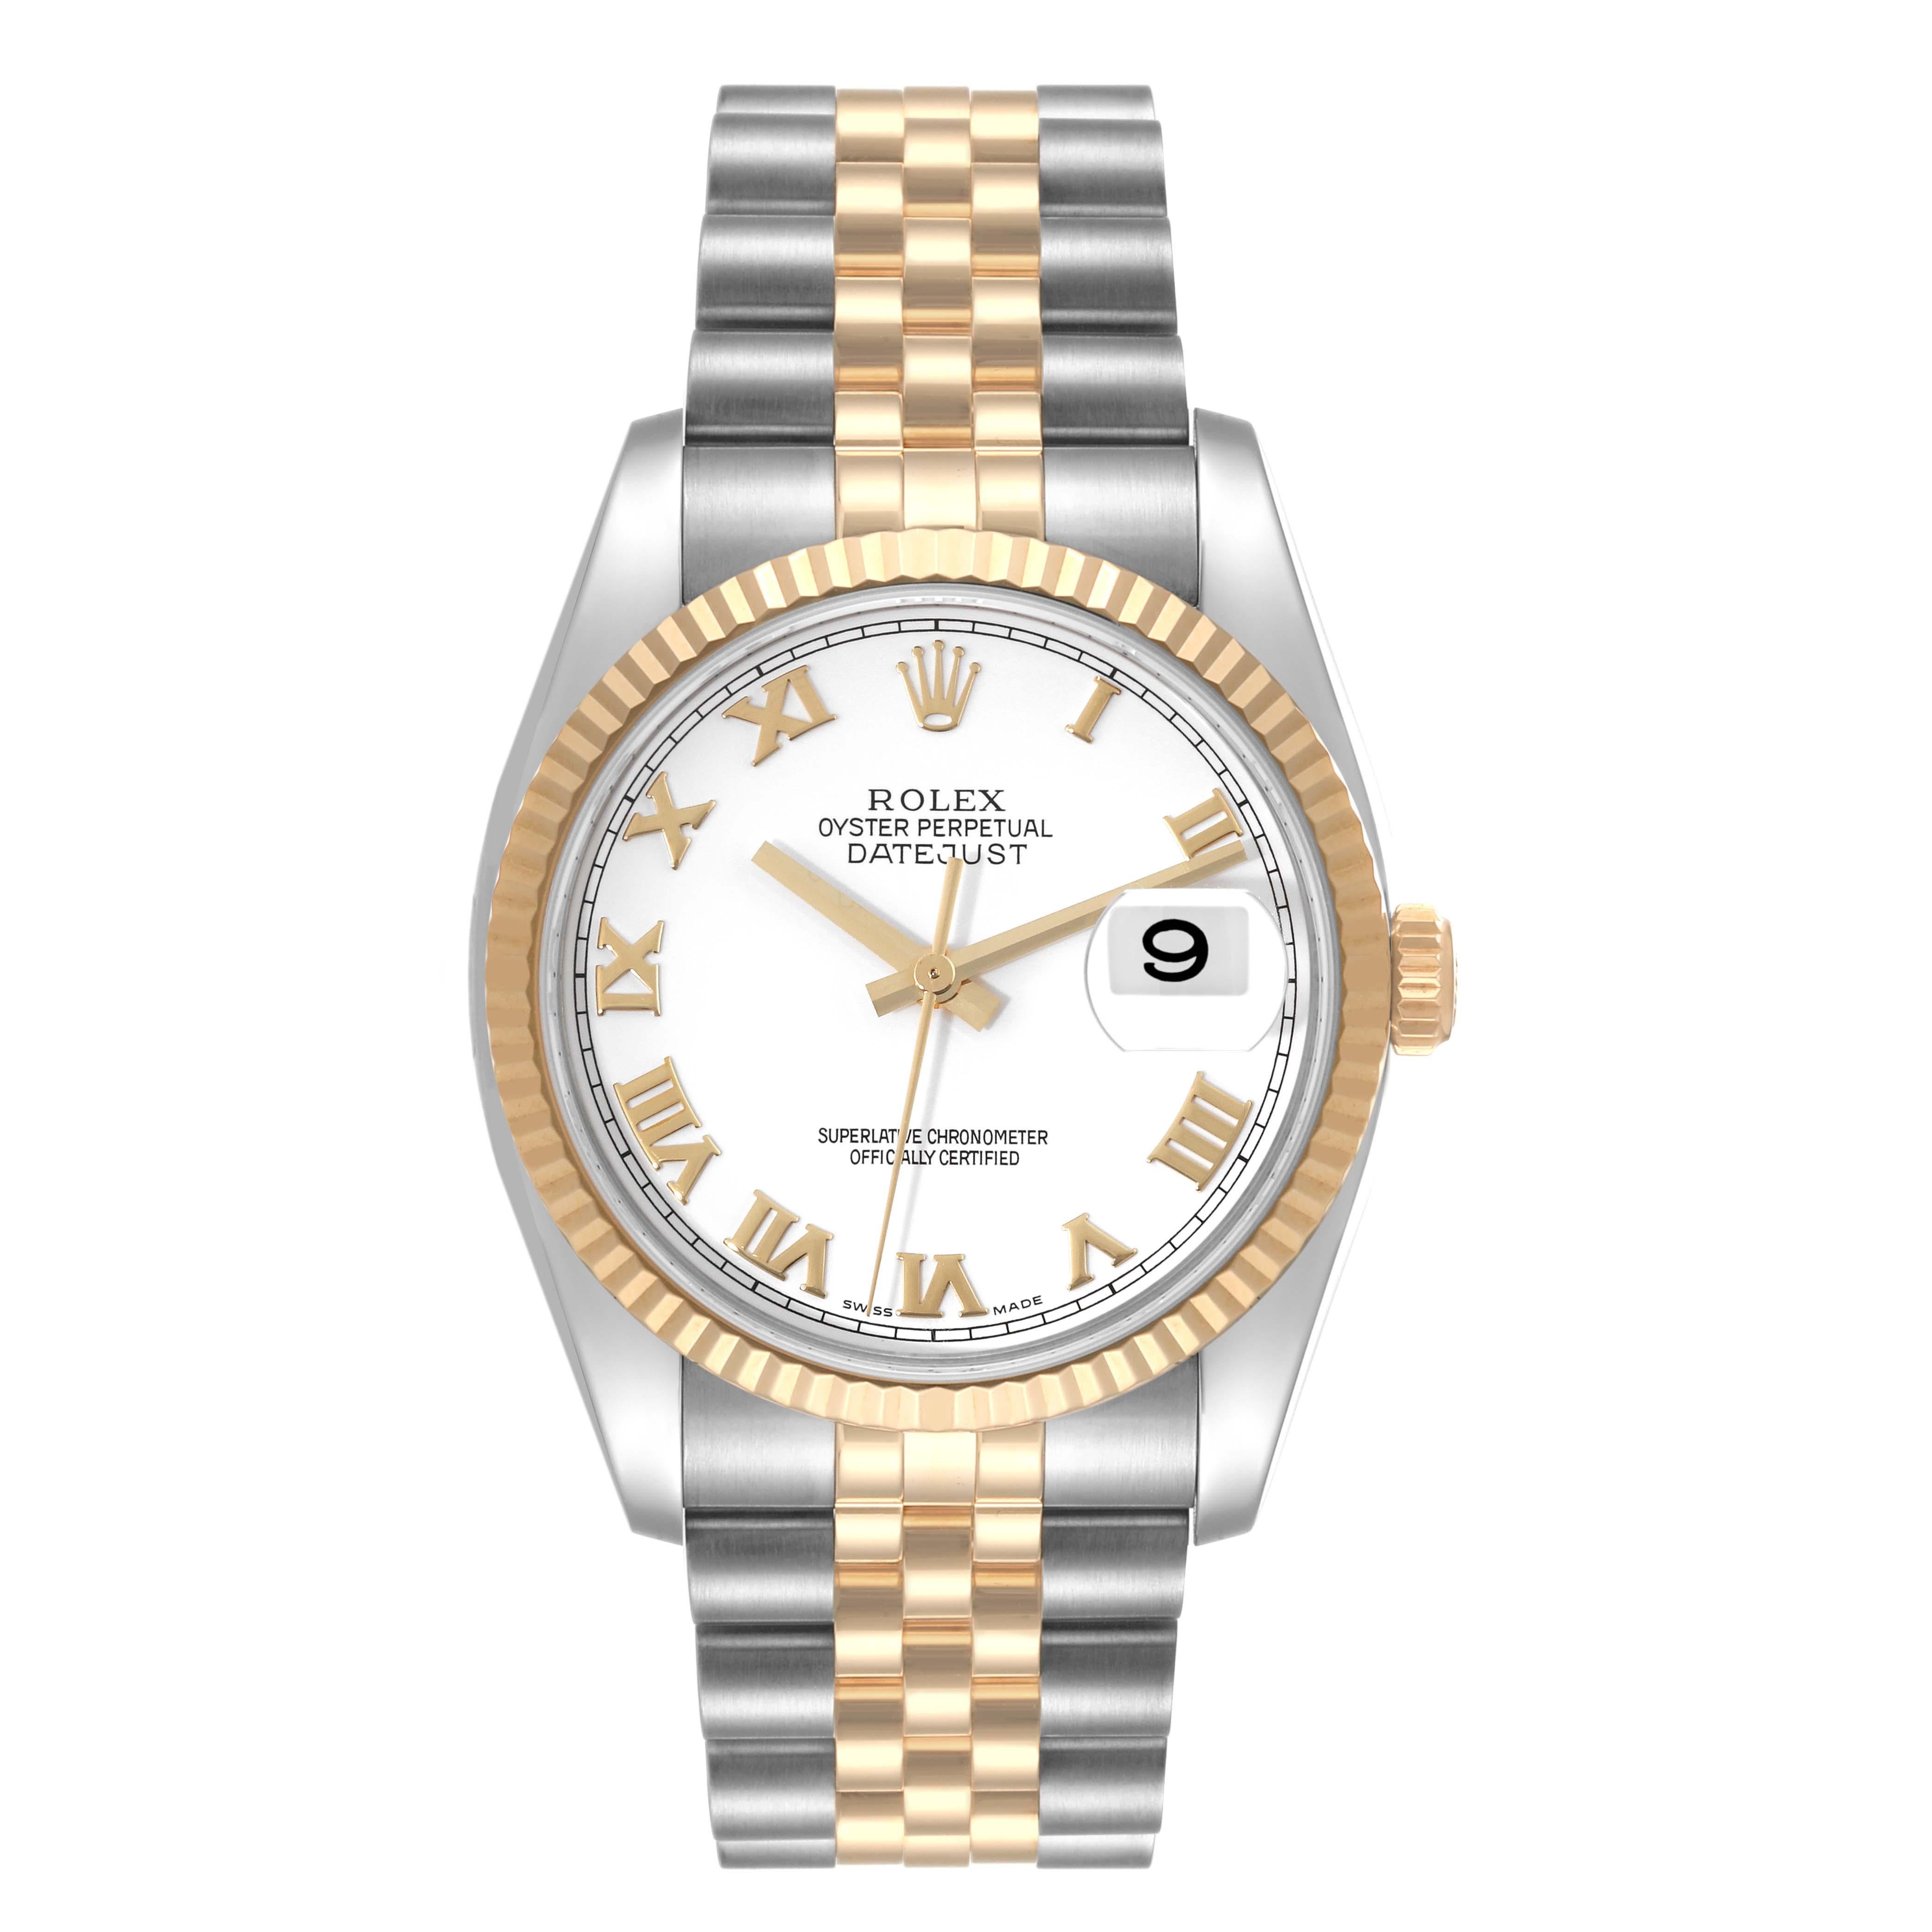 Rolex Datejust Steel Yellow Gold White Dial Mens Watch 116233 Box Card. Officially certified chronometer automatic self-winding movement. Stainless steel case 36.0 mm in diameter. Rolex logo on the crown. 18k yellow gold fluted bezel. Scratch